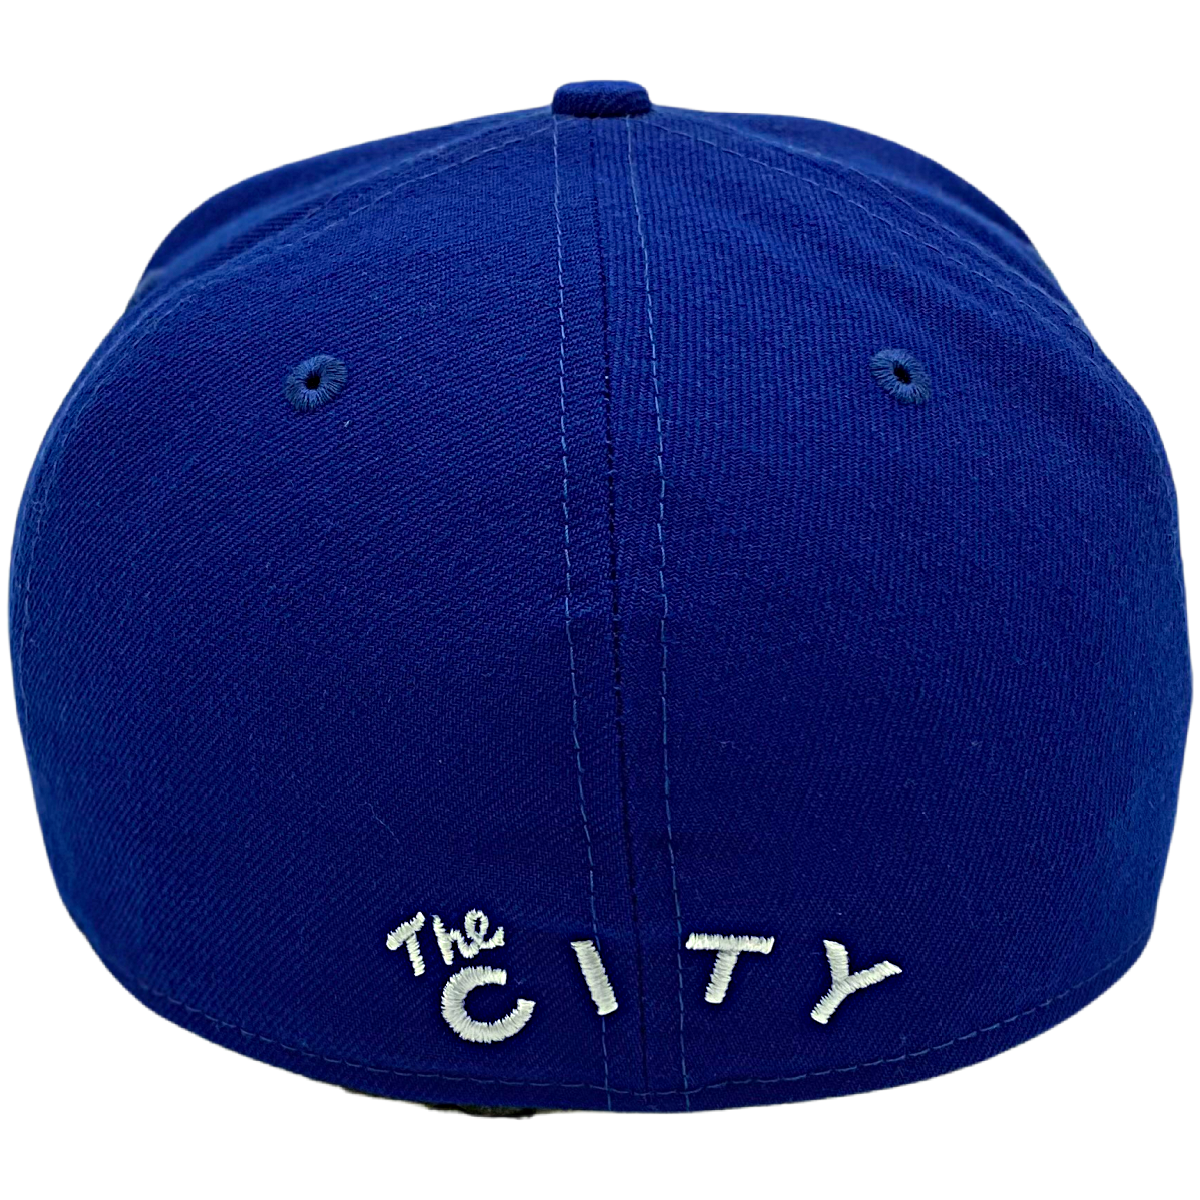 GOLDEN STATE WARRIORS THE CITY NEW ERA 59FIFTY HAT-ROYAL BLUE NVSOCCER.COM THE COLISEUM